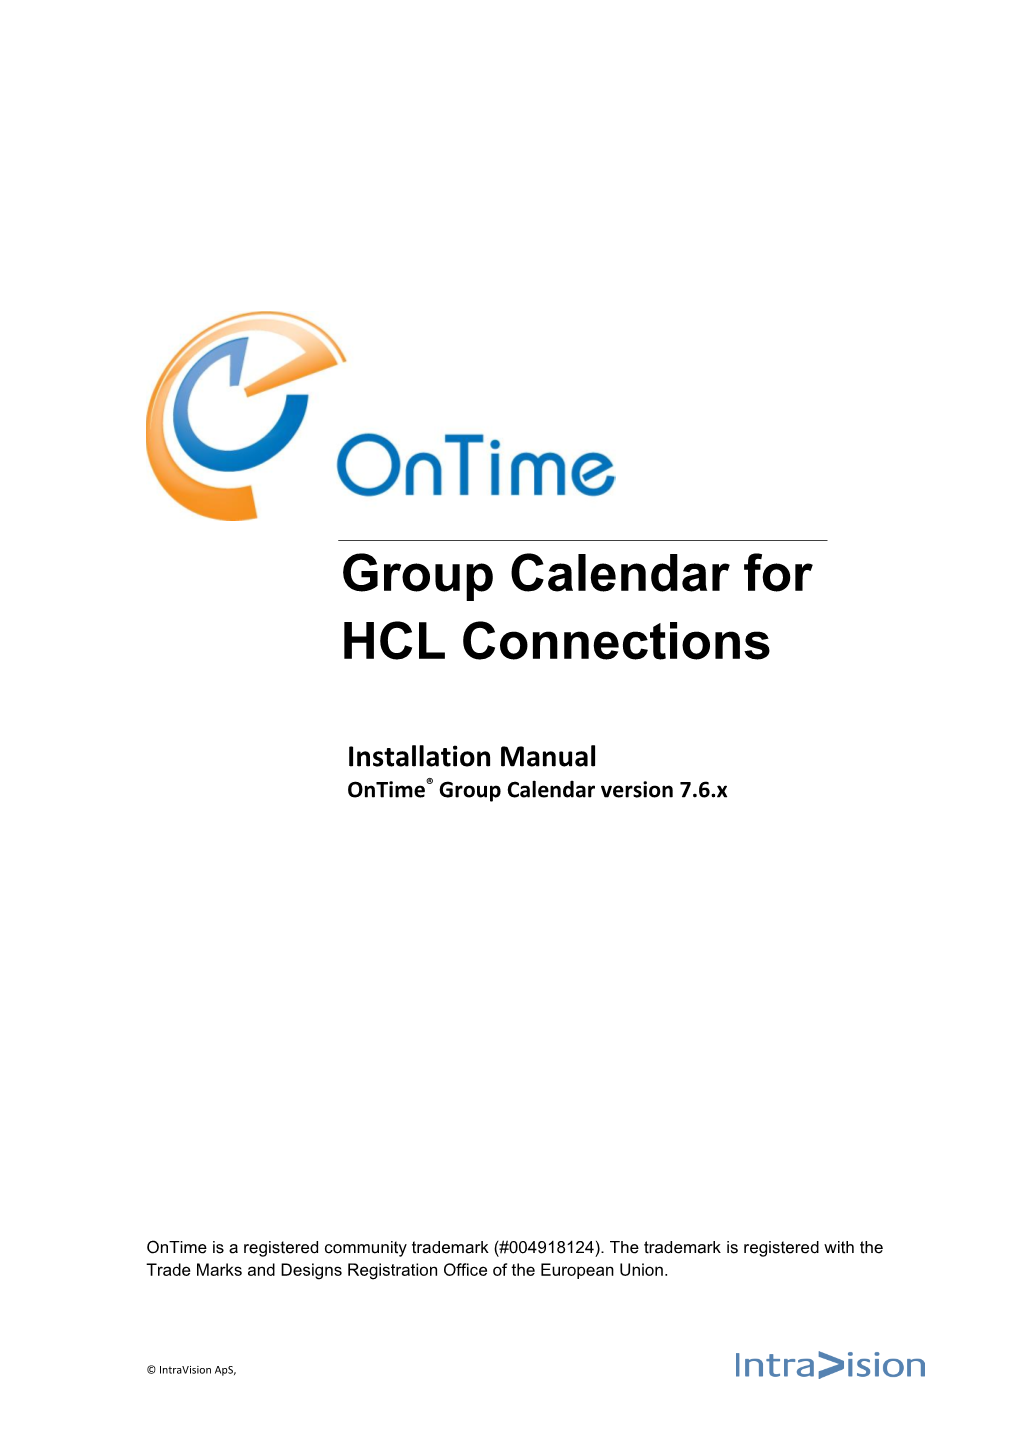 Group Calendar for HCL Connections